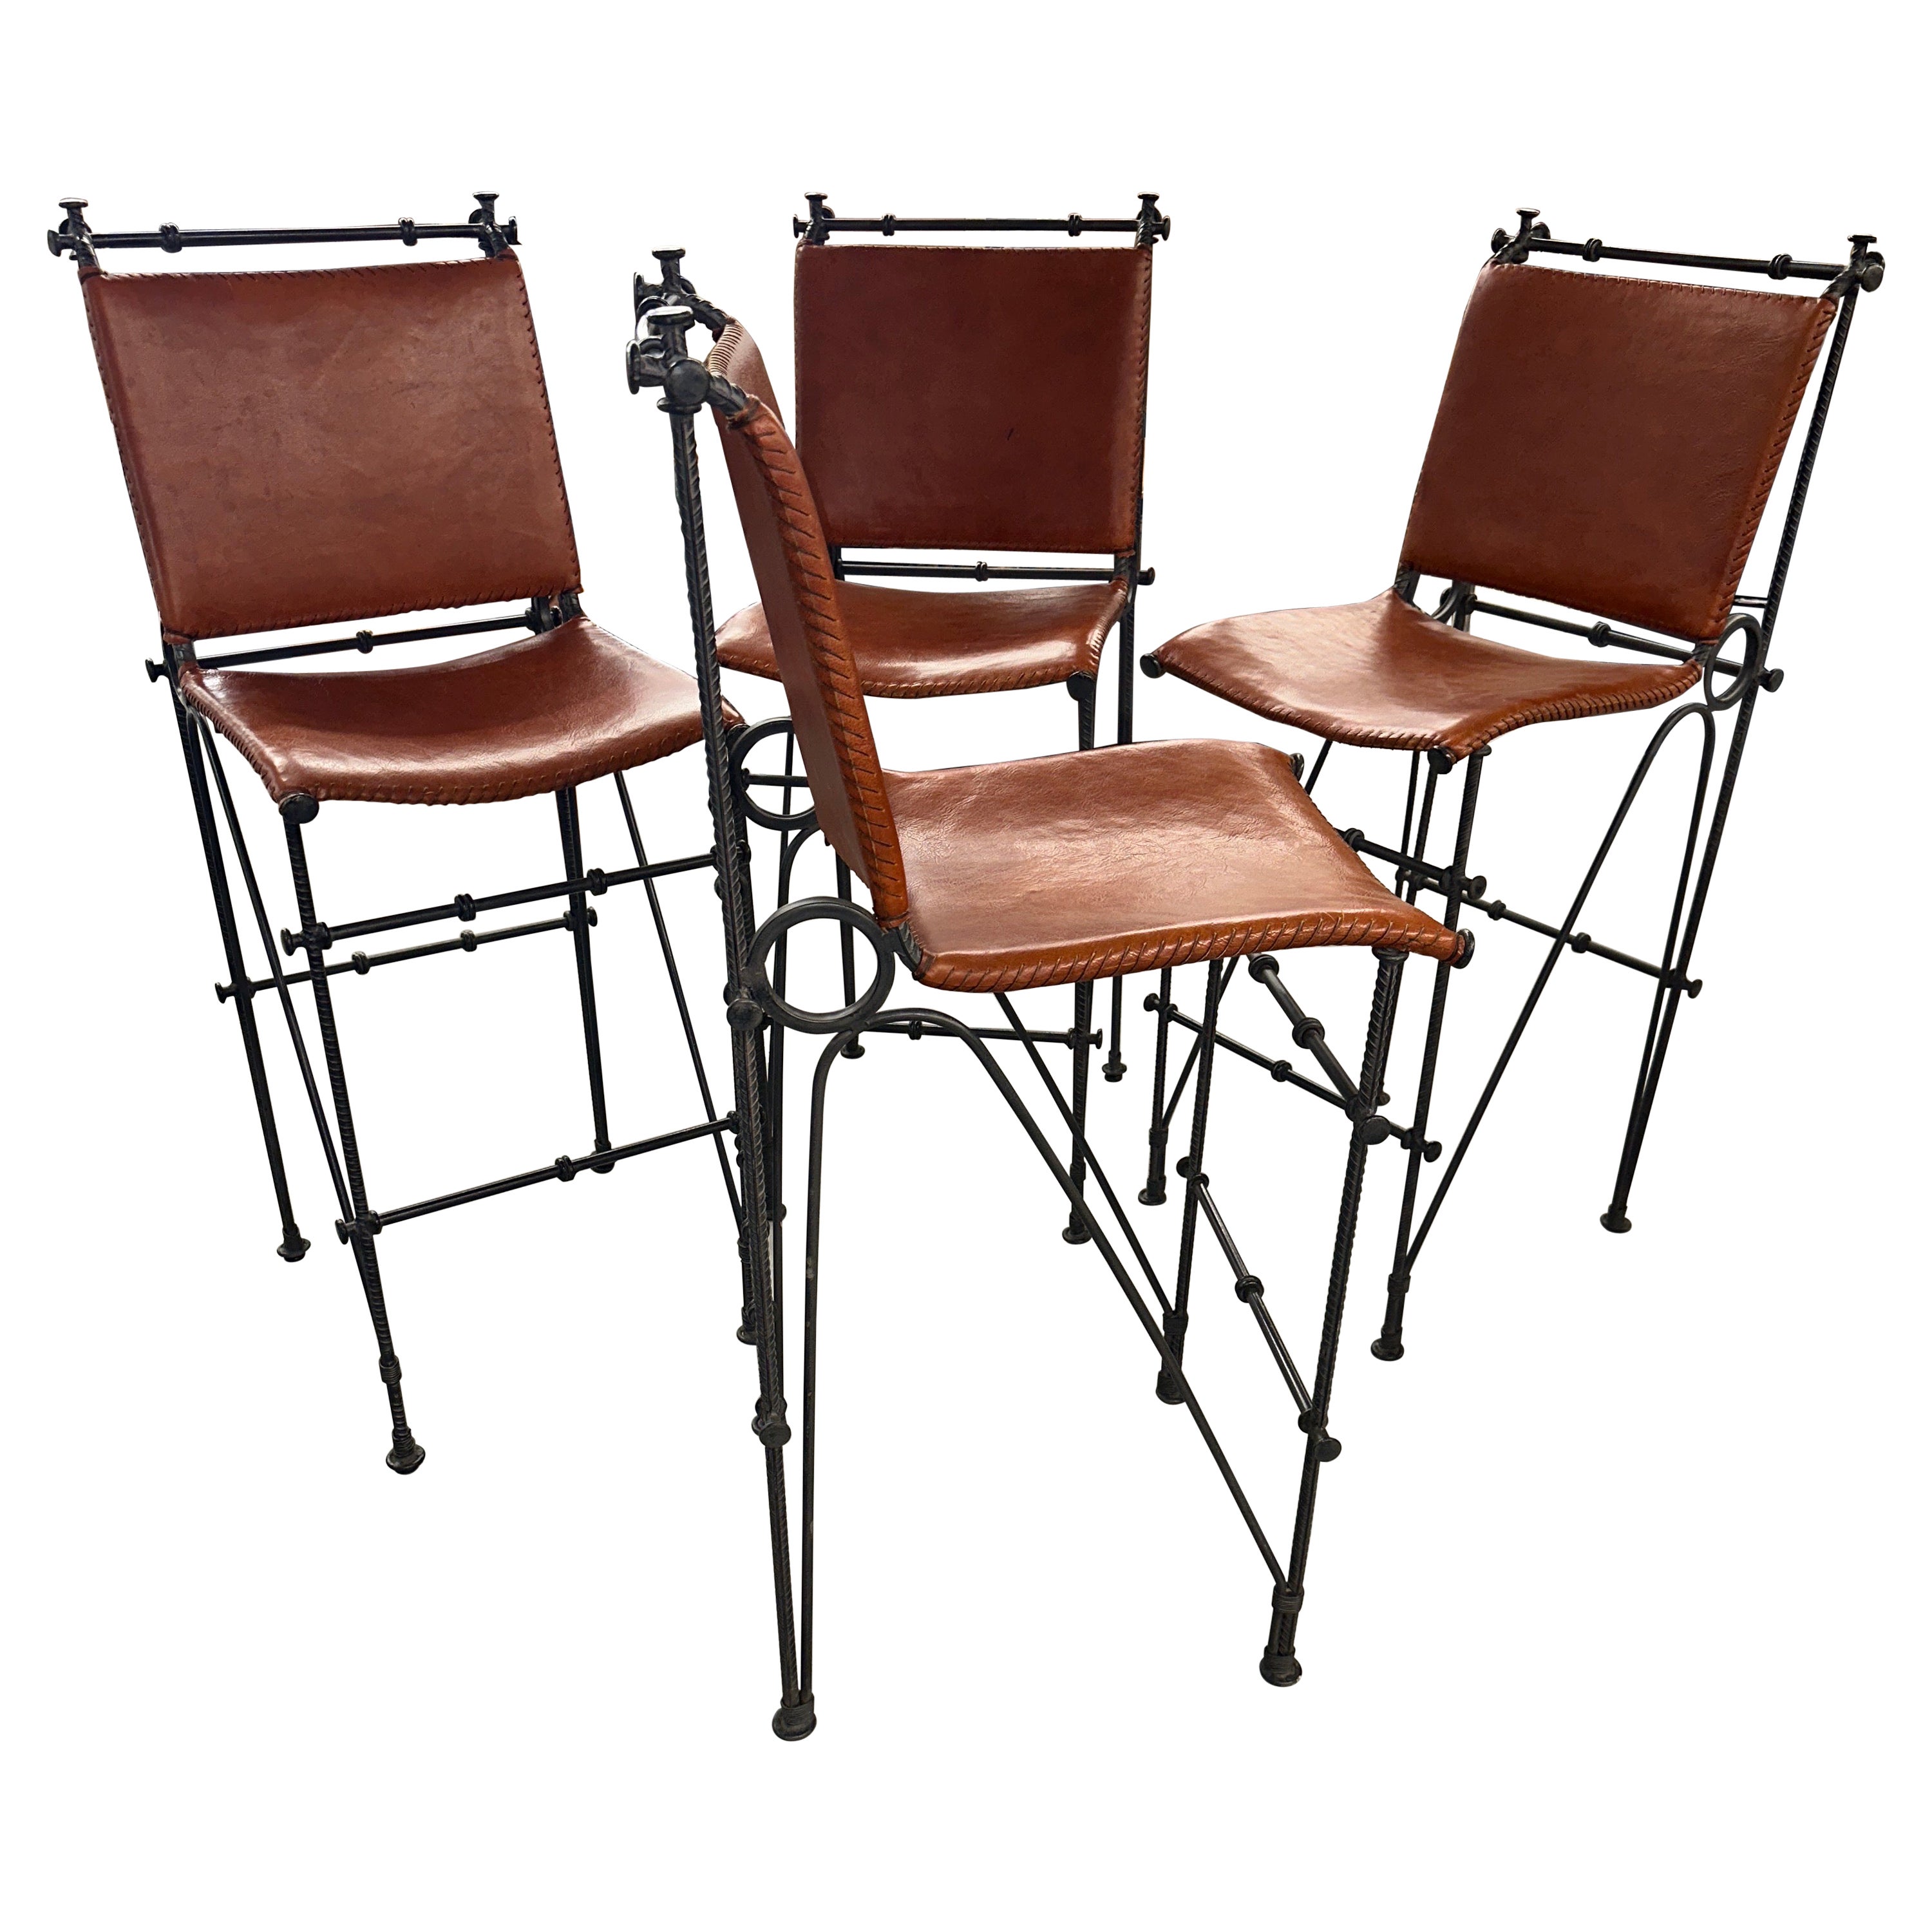 4 Ilana Goor Iron and Leather Barstools For Sale